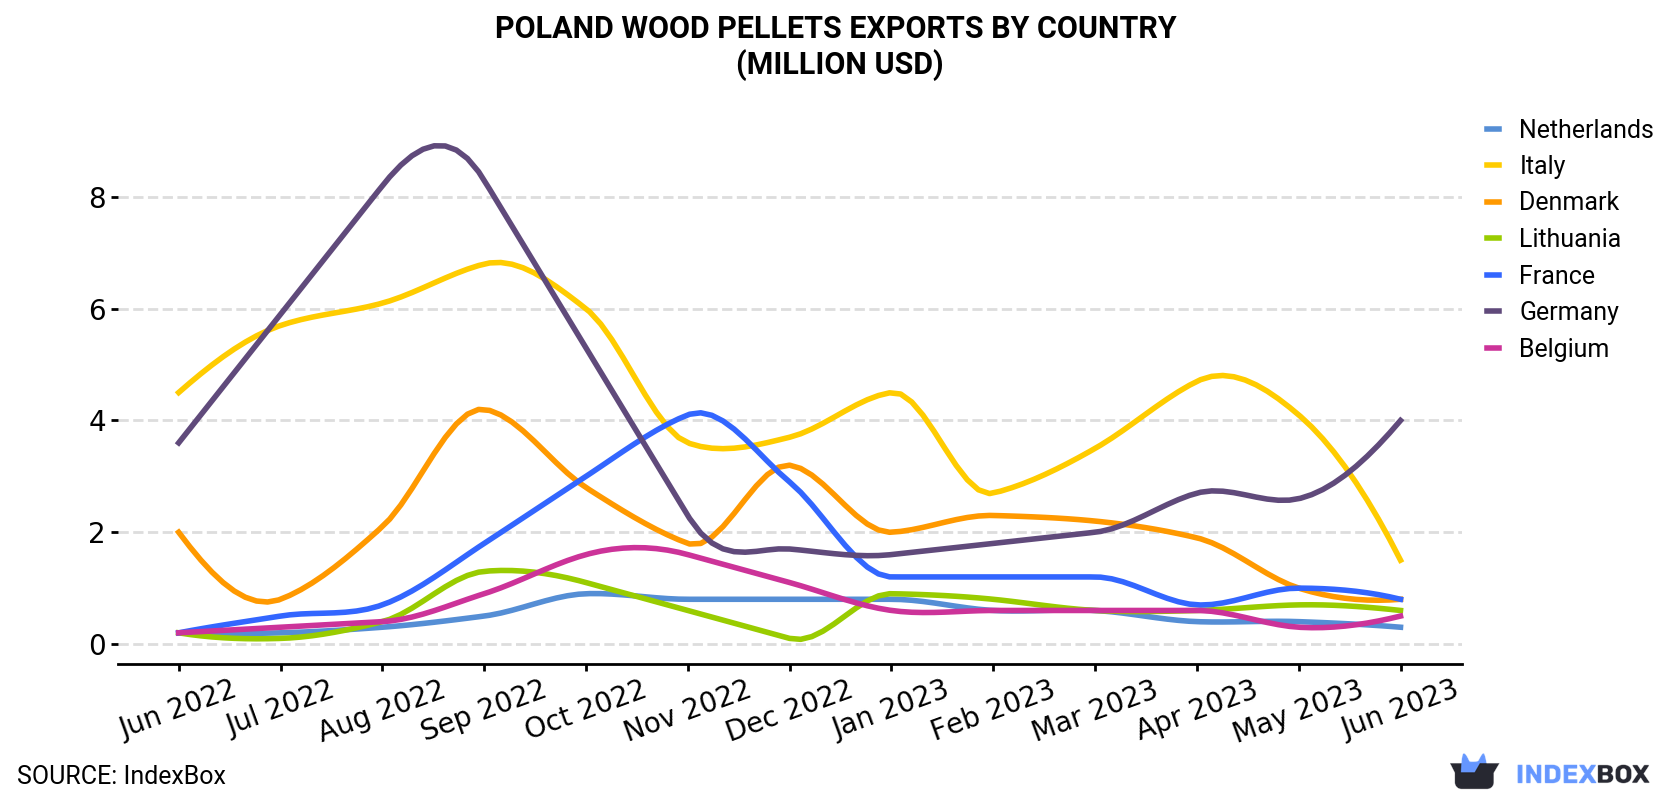 Poland Wood Pellets Exports By Country (Million USD)